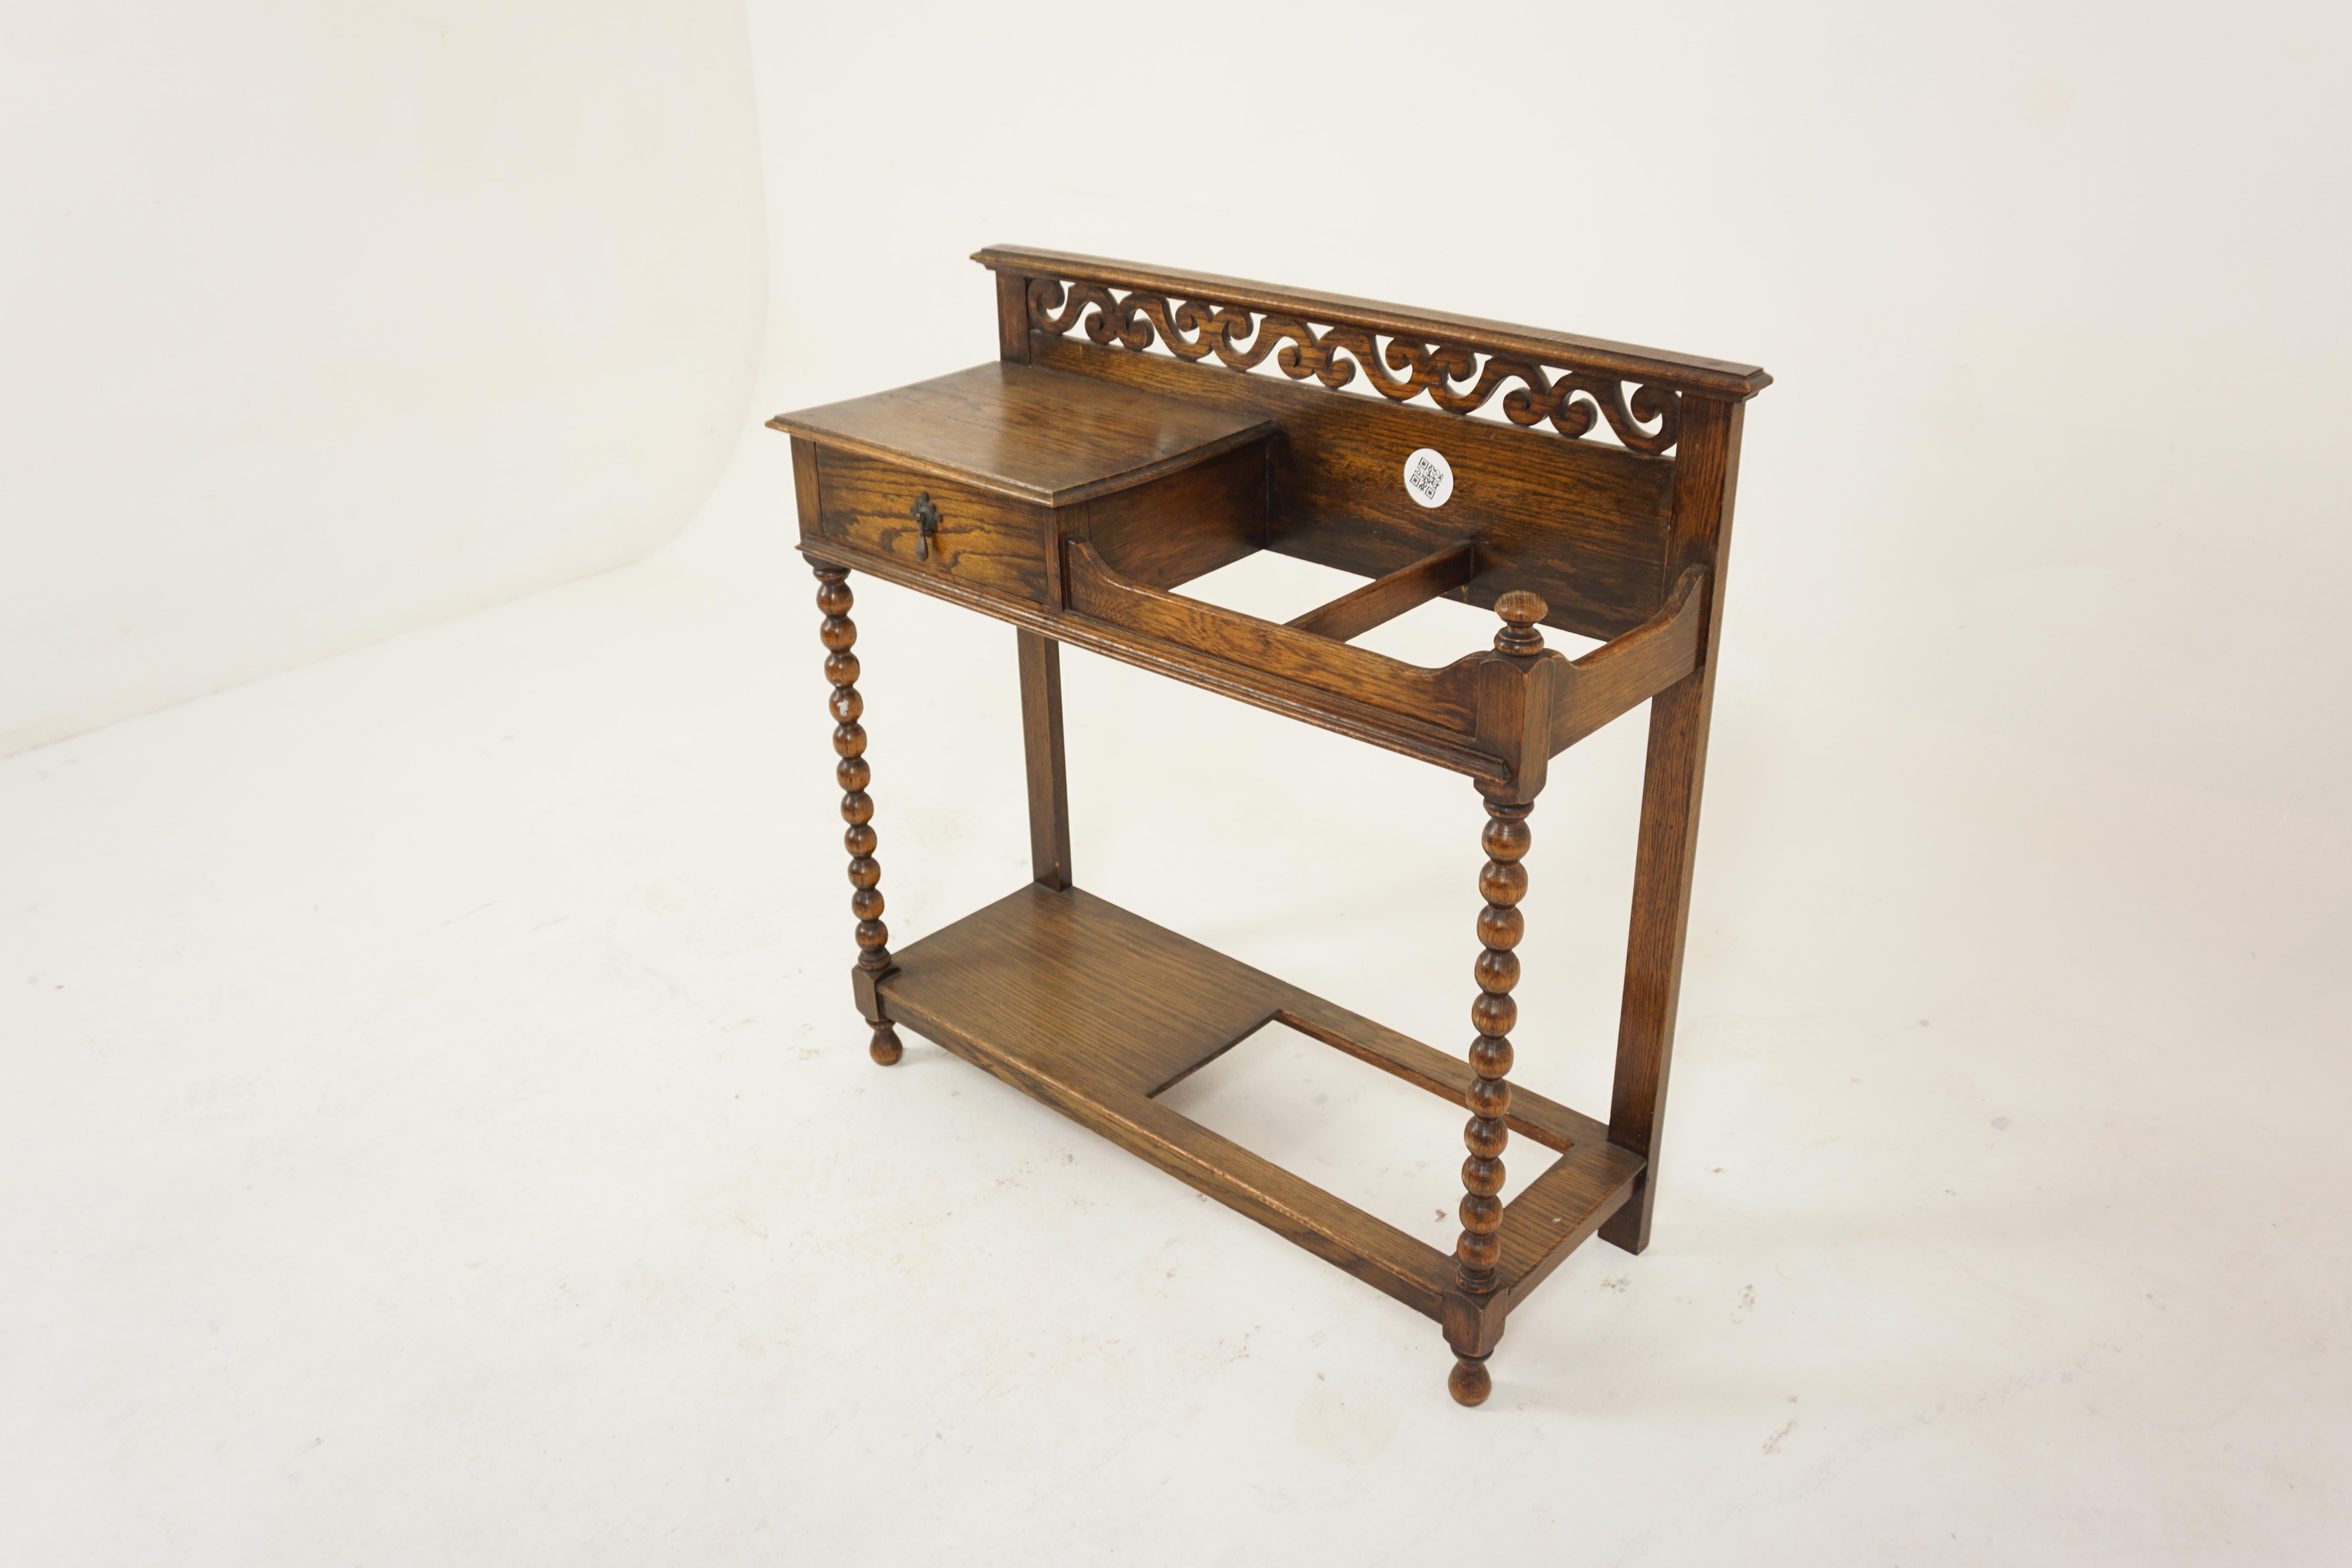 Vintage oak Arts & Crafts hall stick, umbrella stand, Bobbin Leg, Scotland 1930, H867

Scotland, 1930
Solid Oak
Original Finish
With carved fretwork back
Single drawer to the left with drop handle
Two division stitch umbrella stand
Standing